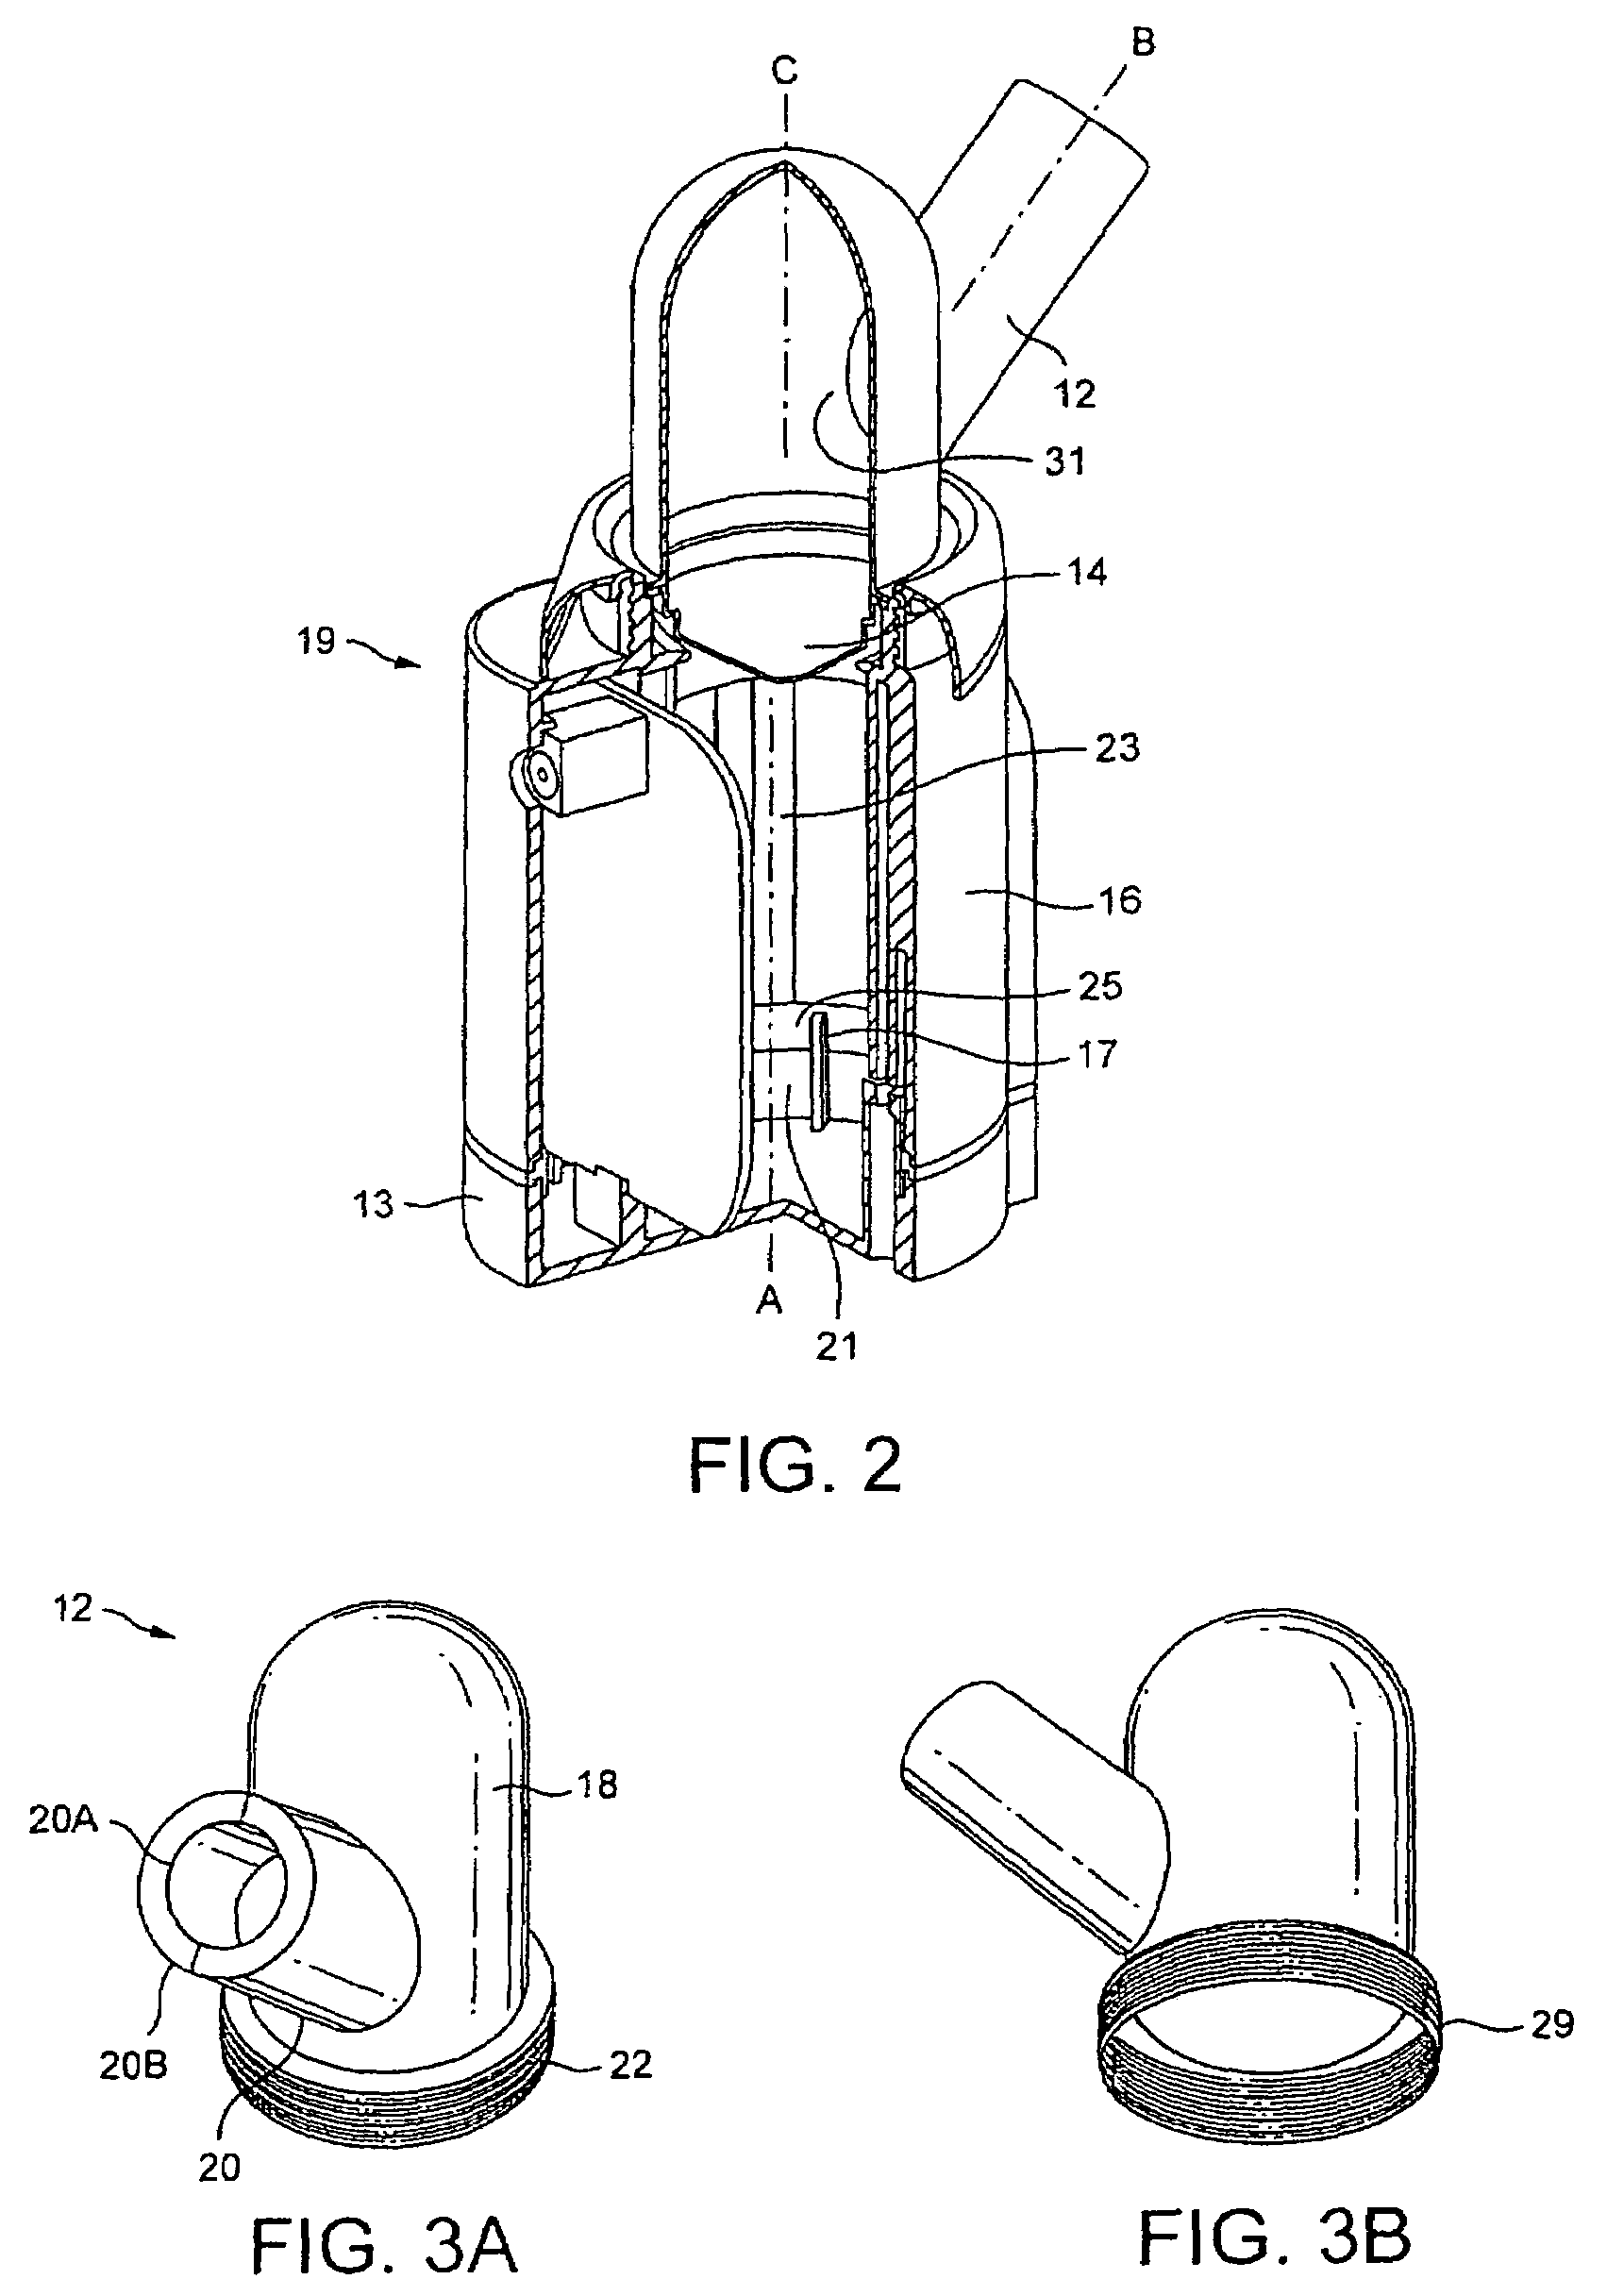 Breath-enhanced ultrasonic nebulizer and dedicated unit dose ampoule